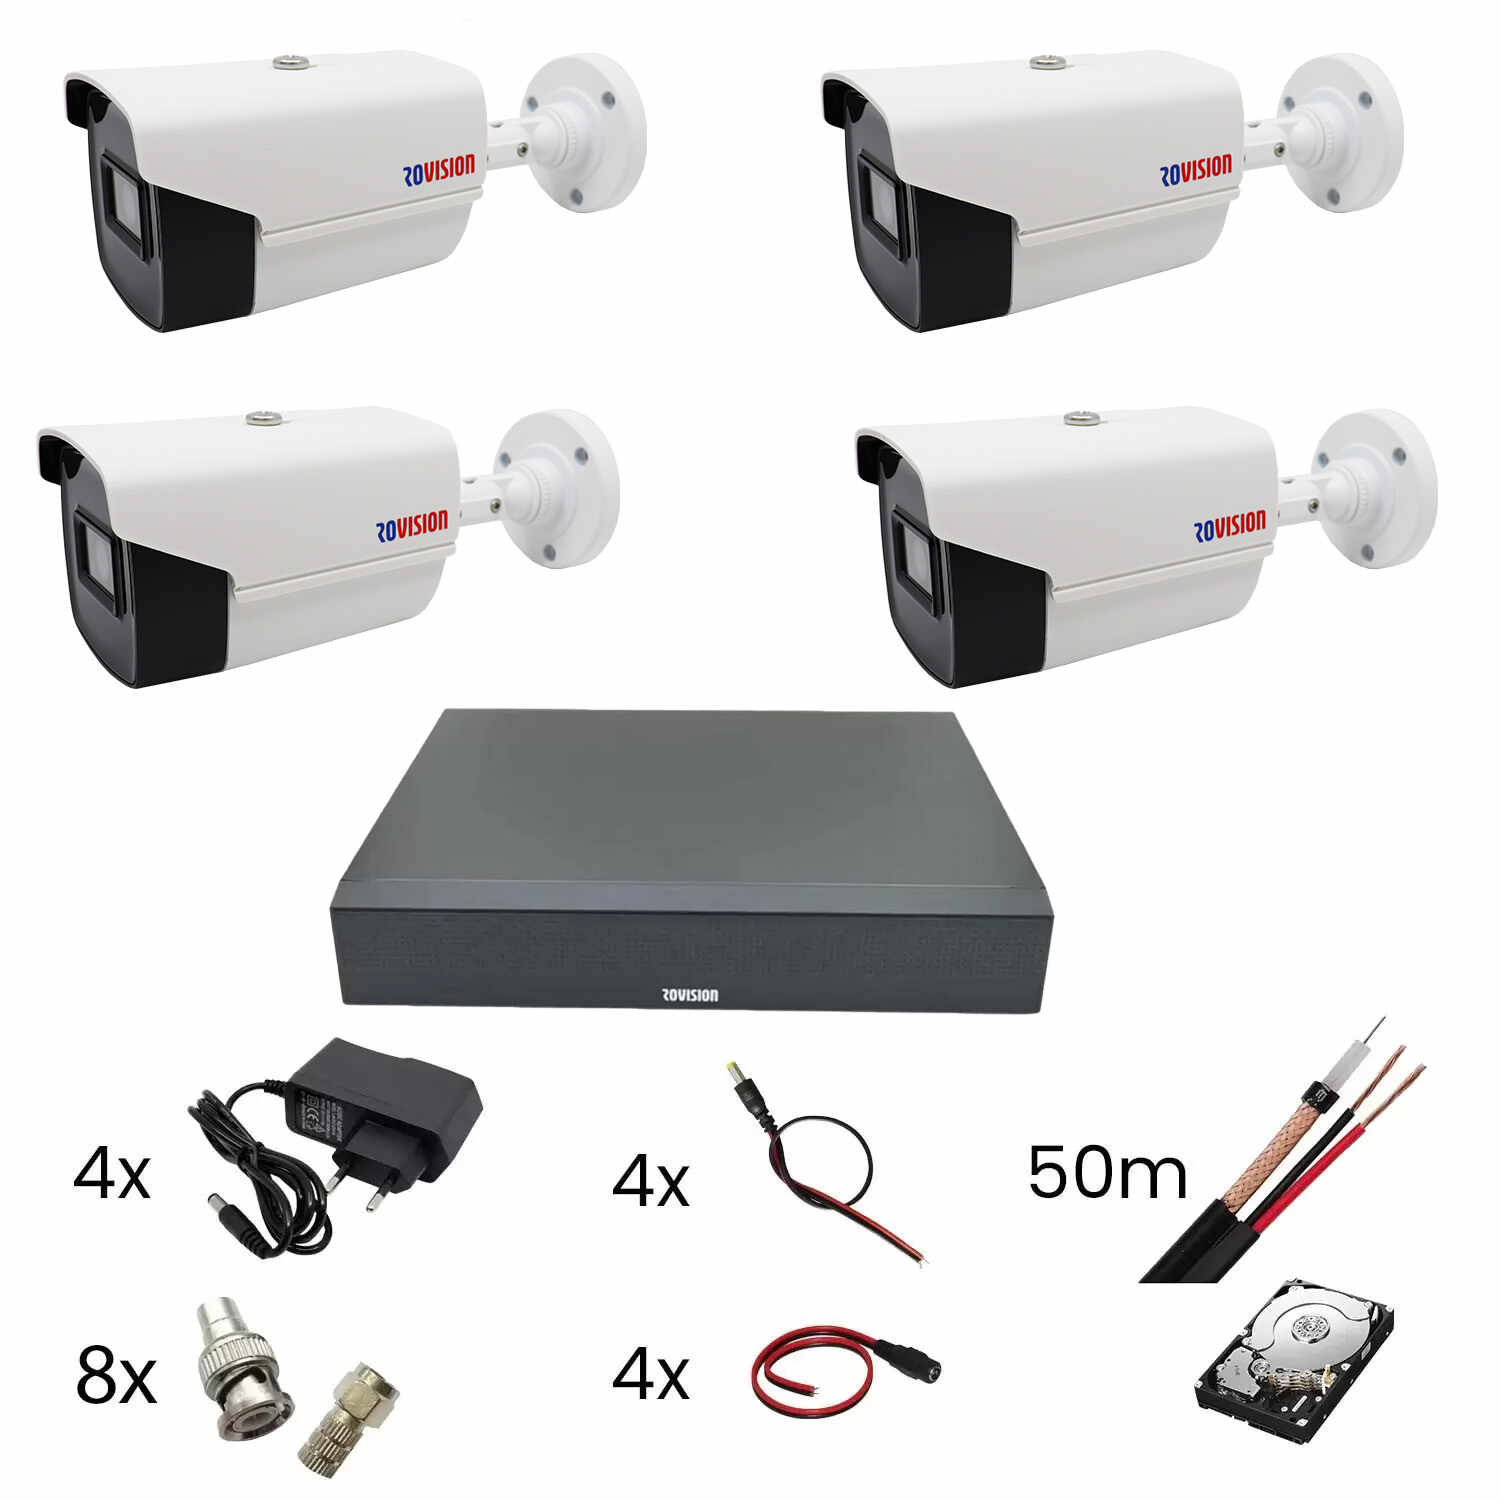 Kit supraveghere 4 camere Rovision oem Hikvision 4 in 1 full hd, 2MP, 2.8mm, DVR Pentabrid 4 canale, 1080N H.264+, accesorii si HDD